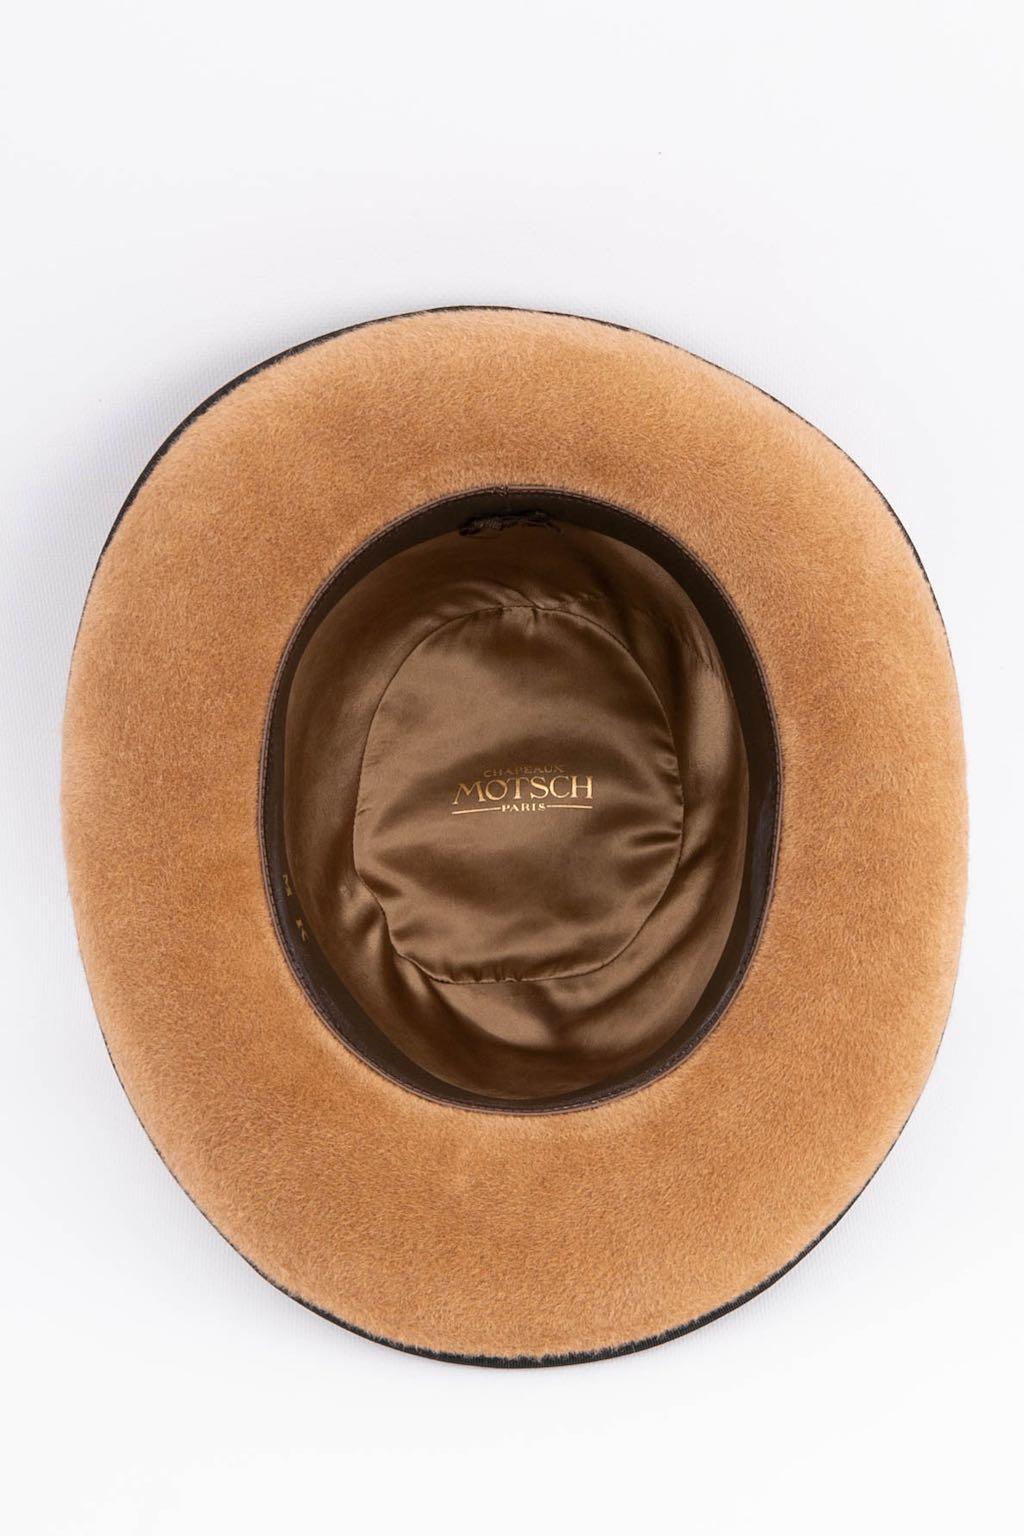 Motsch Brown Hat Trimmed with Black Fabric For Sale 2